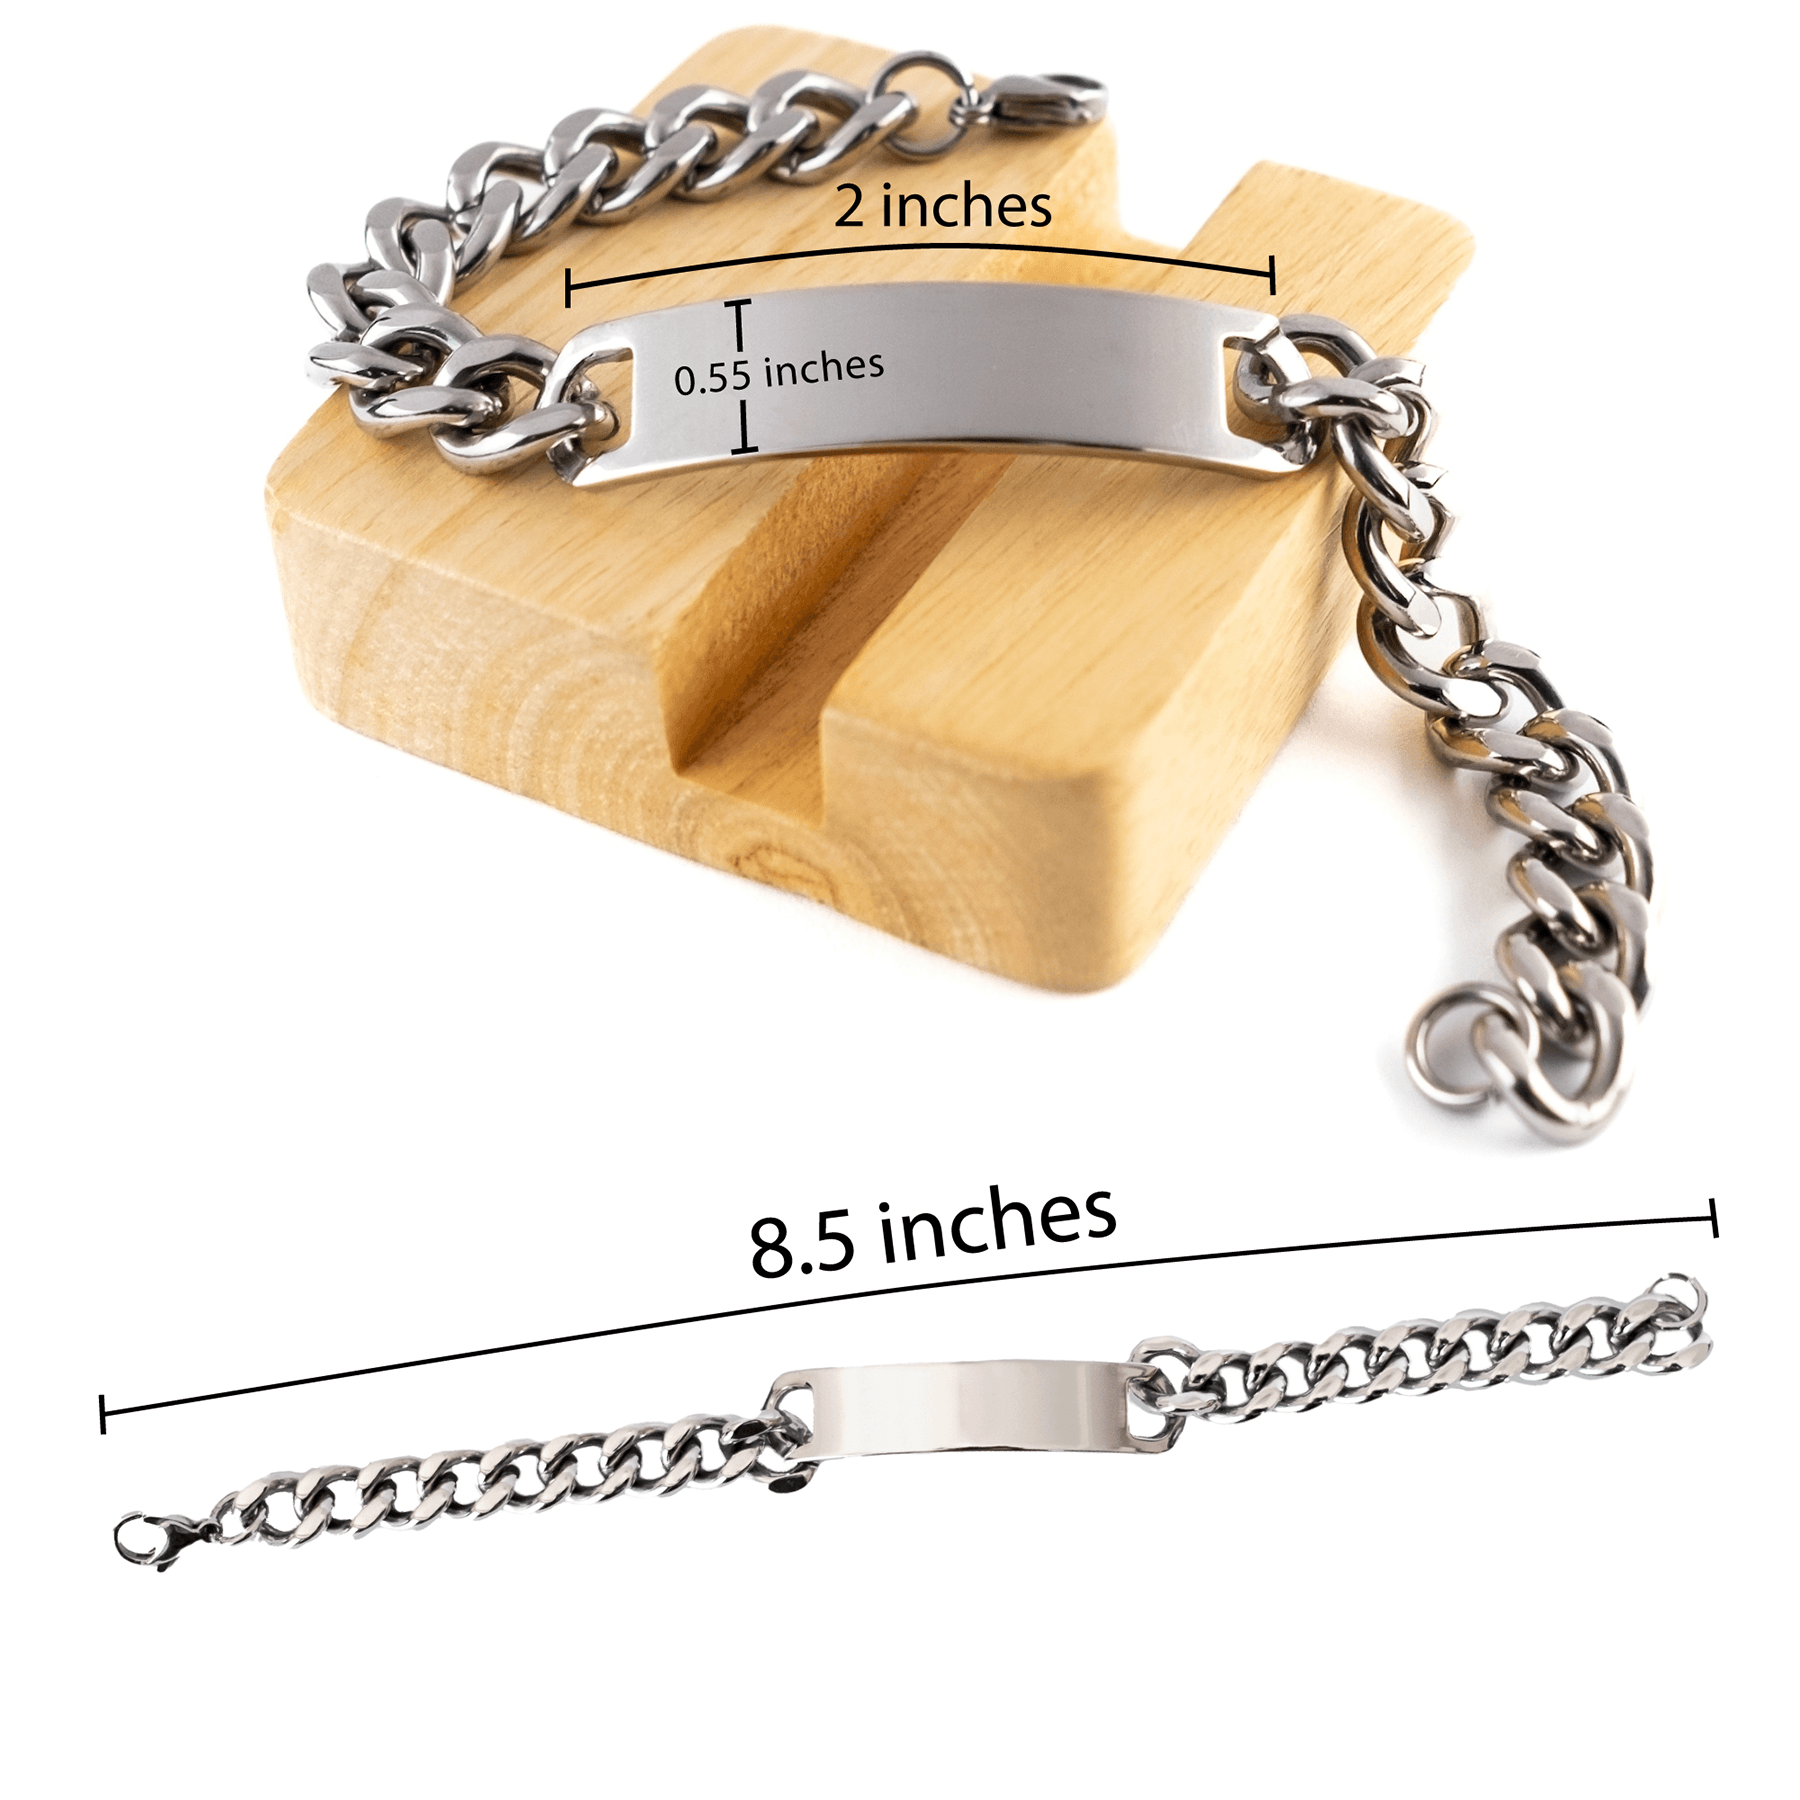 Physician Cuban Chain Link Engraved Bracelet - Thanks for being who you are - Birthday Christmas Jewelry Gifts Coworkers Colleague Boss - Mallard Moon Gift Shop